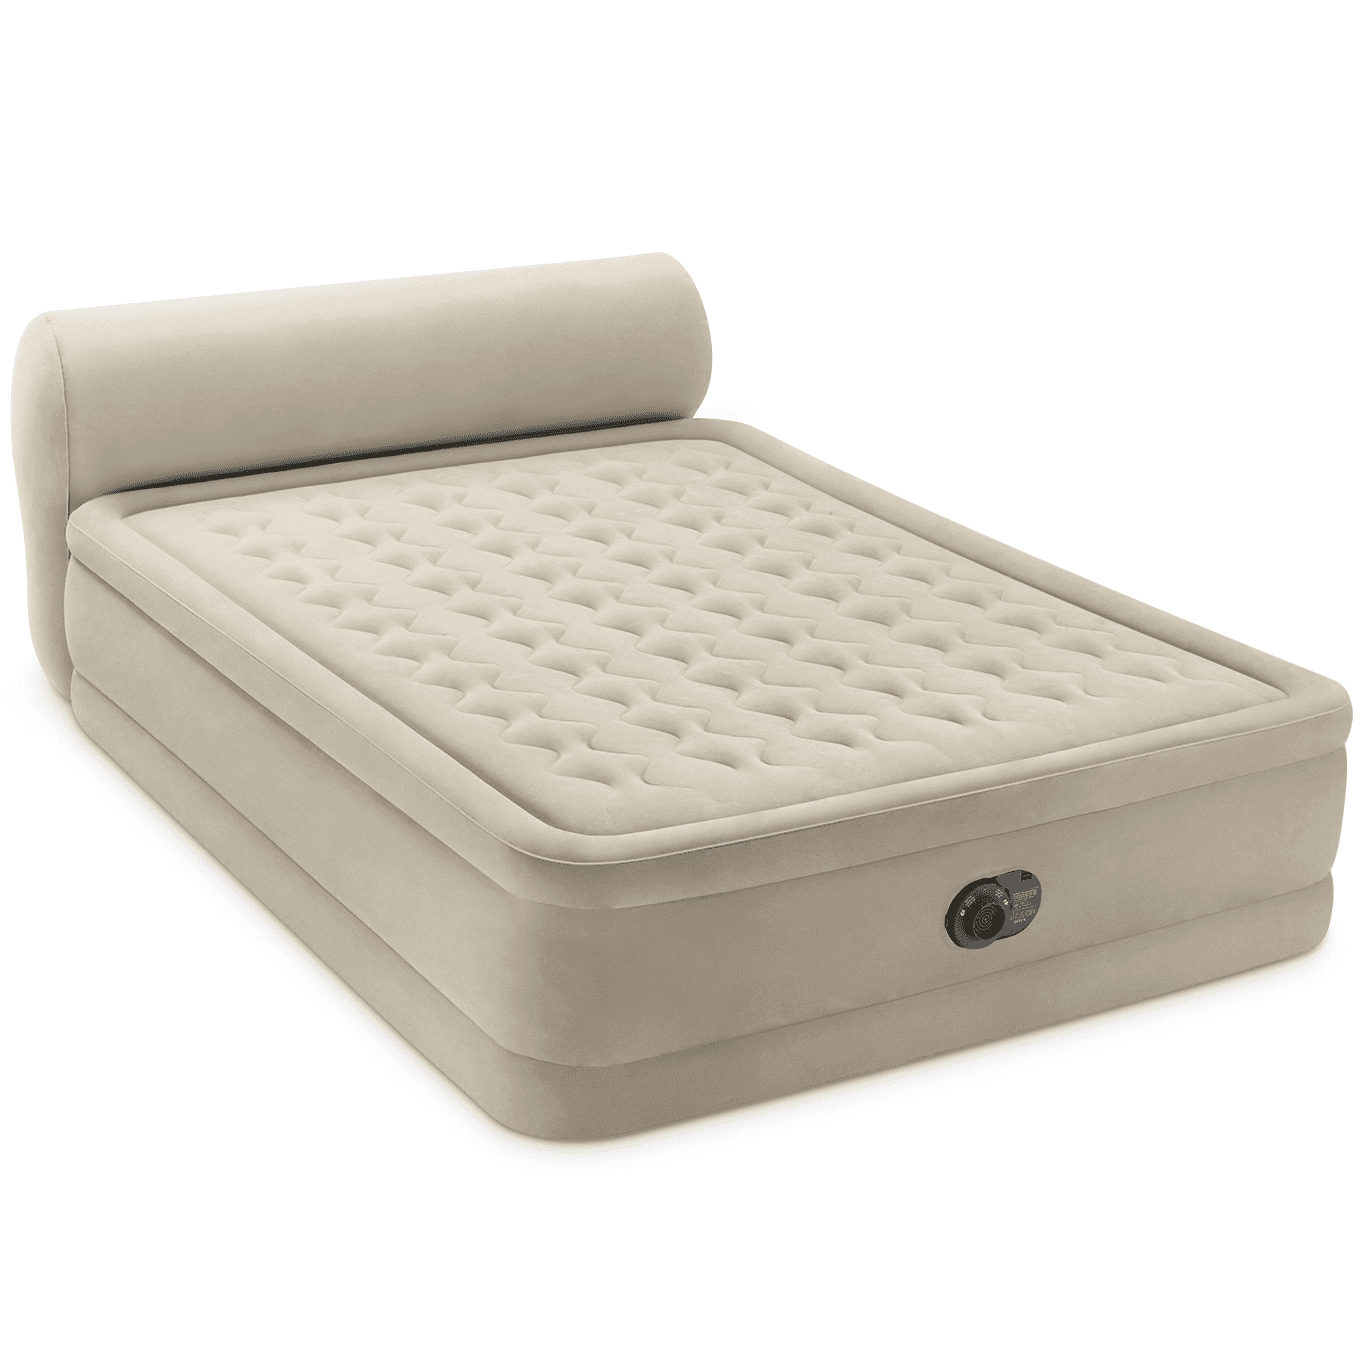 Durabeam Raised Air Mattress Bed 22 Inflatable Pump Camping Blow Up Queen 